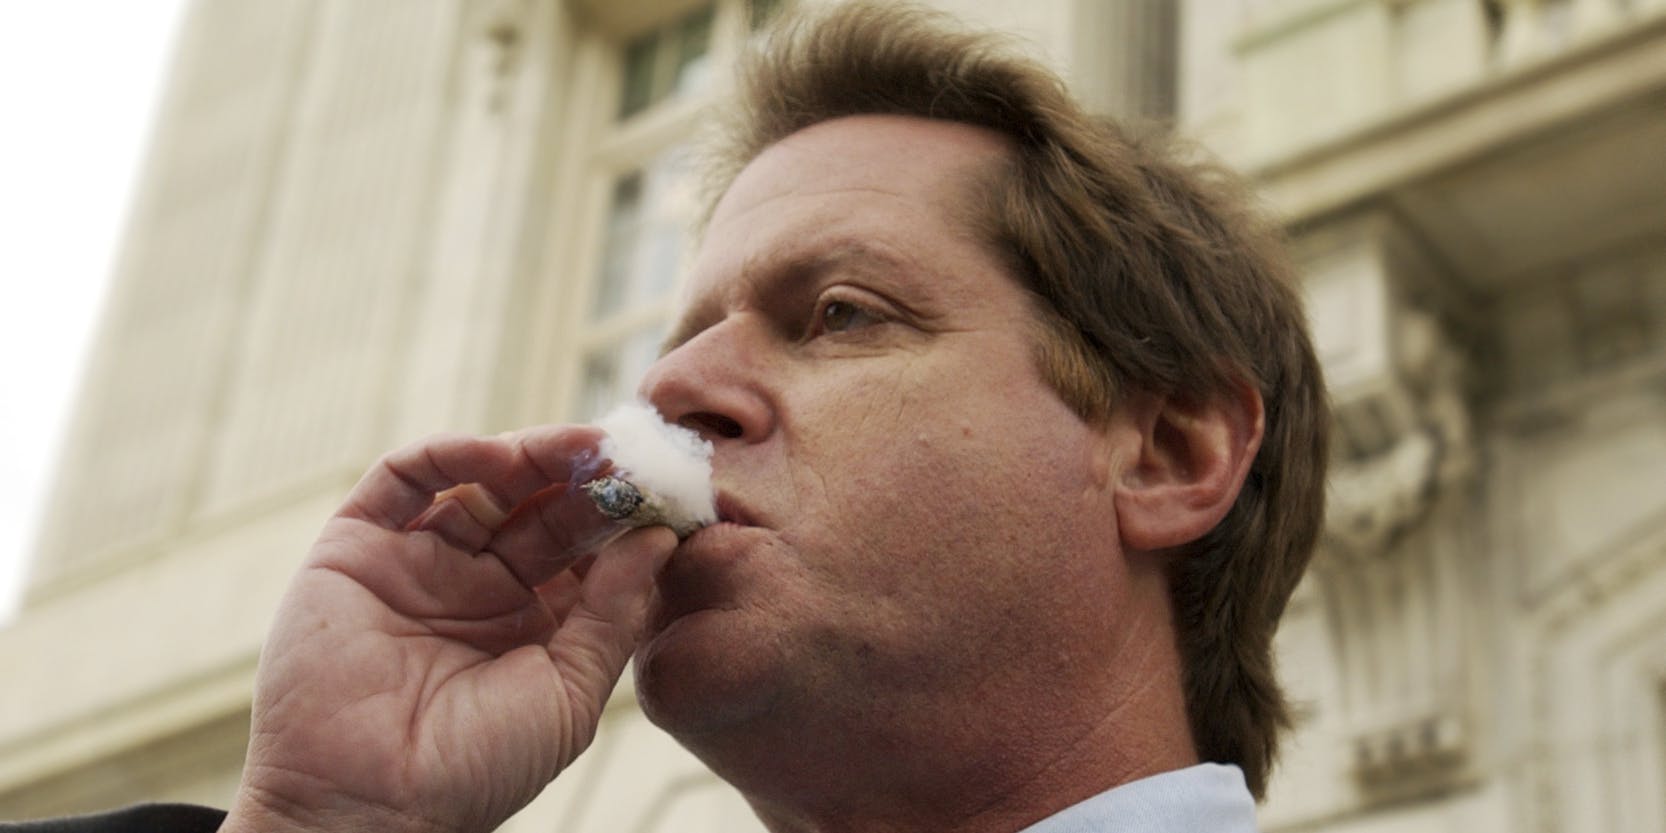 Floridian Medical Marijuana Irvin Rosenfeld smoke a joint on the steps of the Florida capitol building